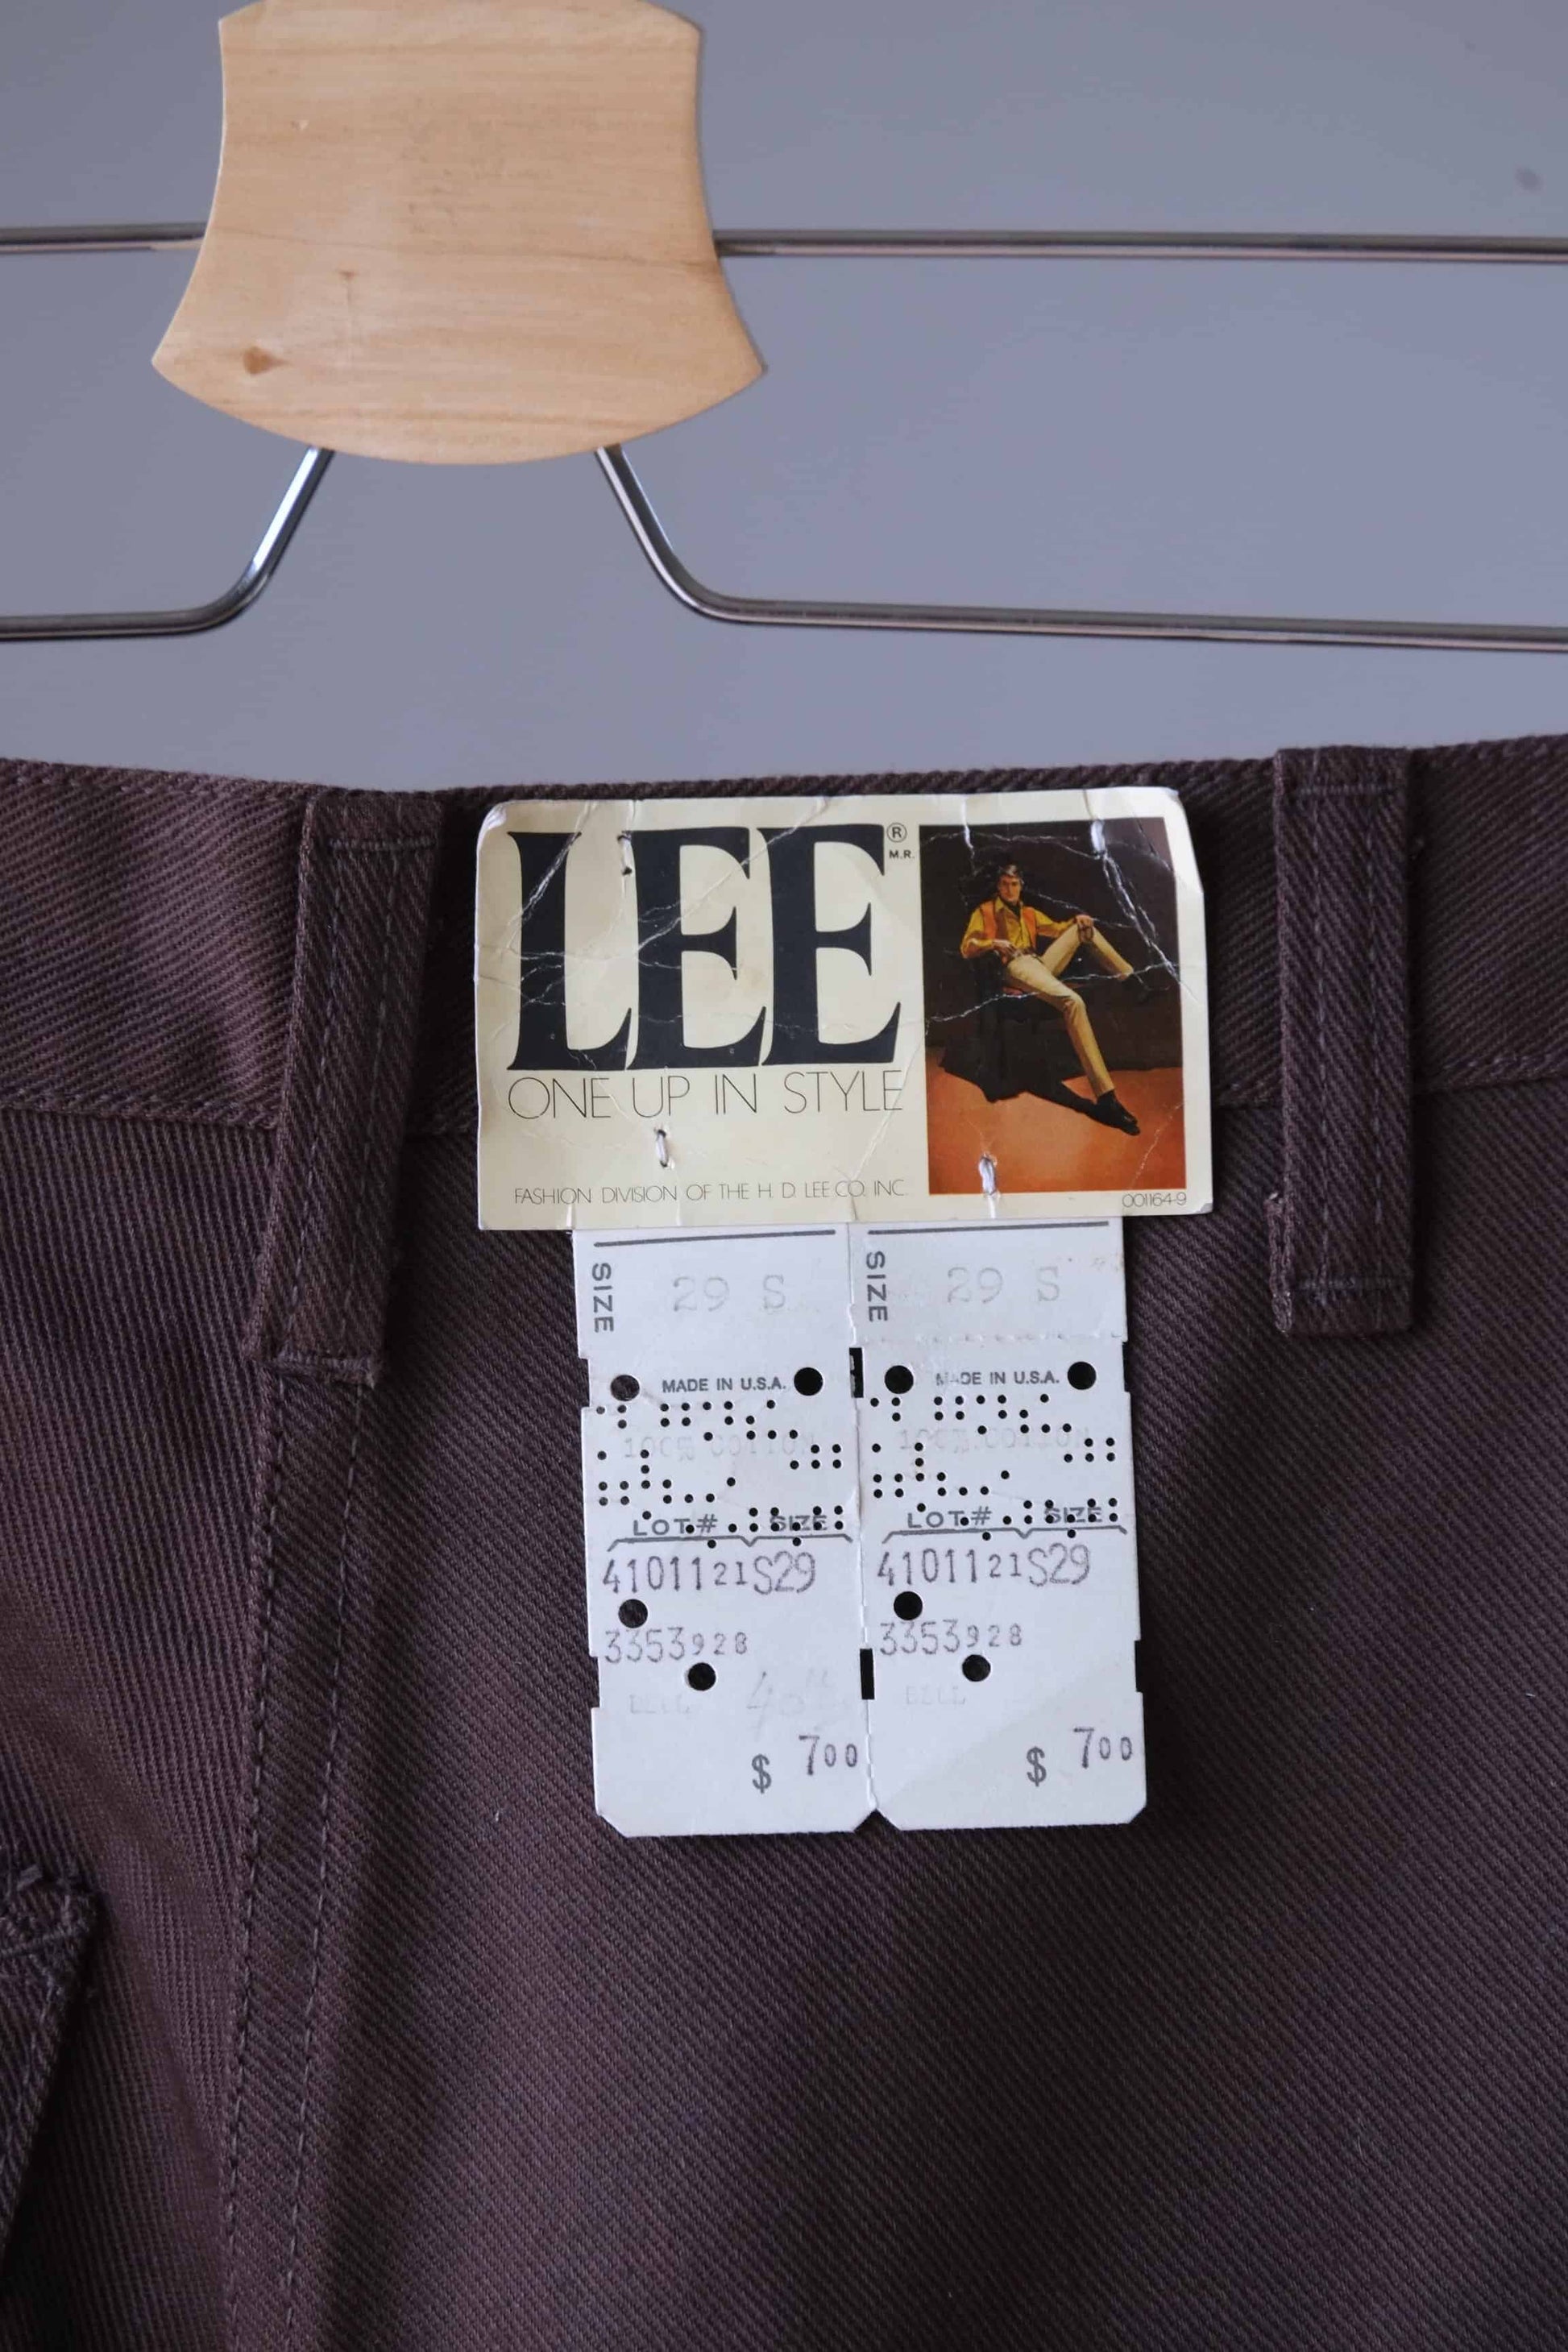 Close view of the Lee tag on the back of a pair of vintage brown pants